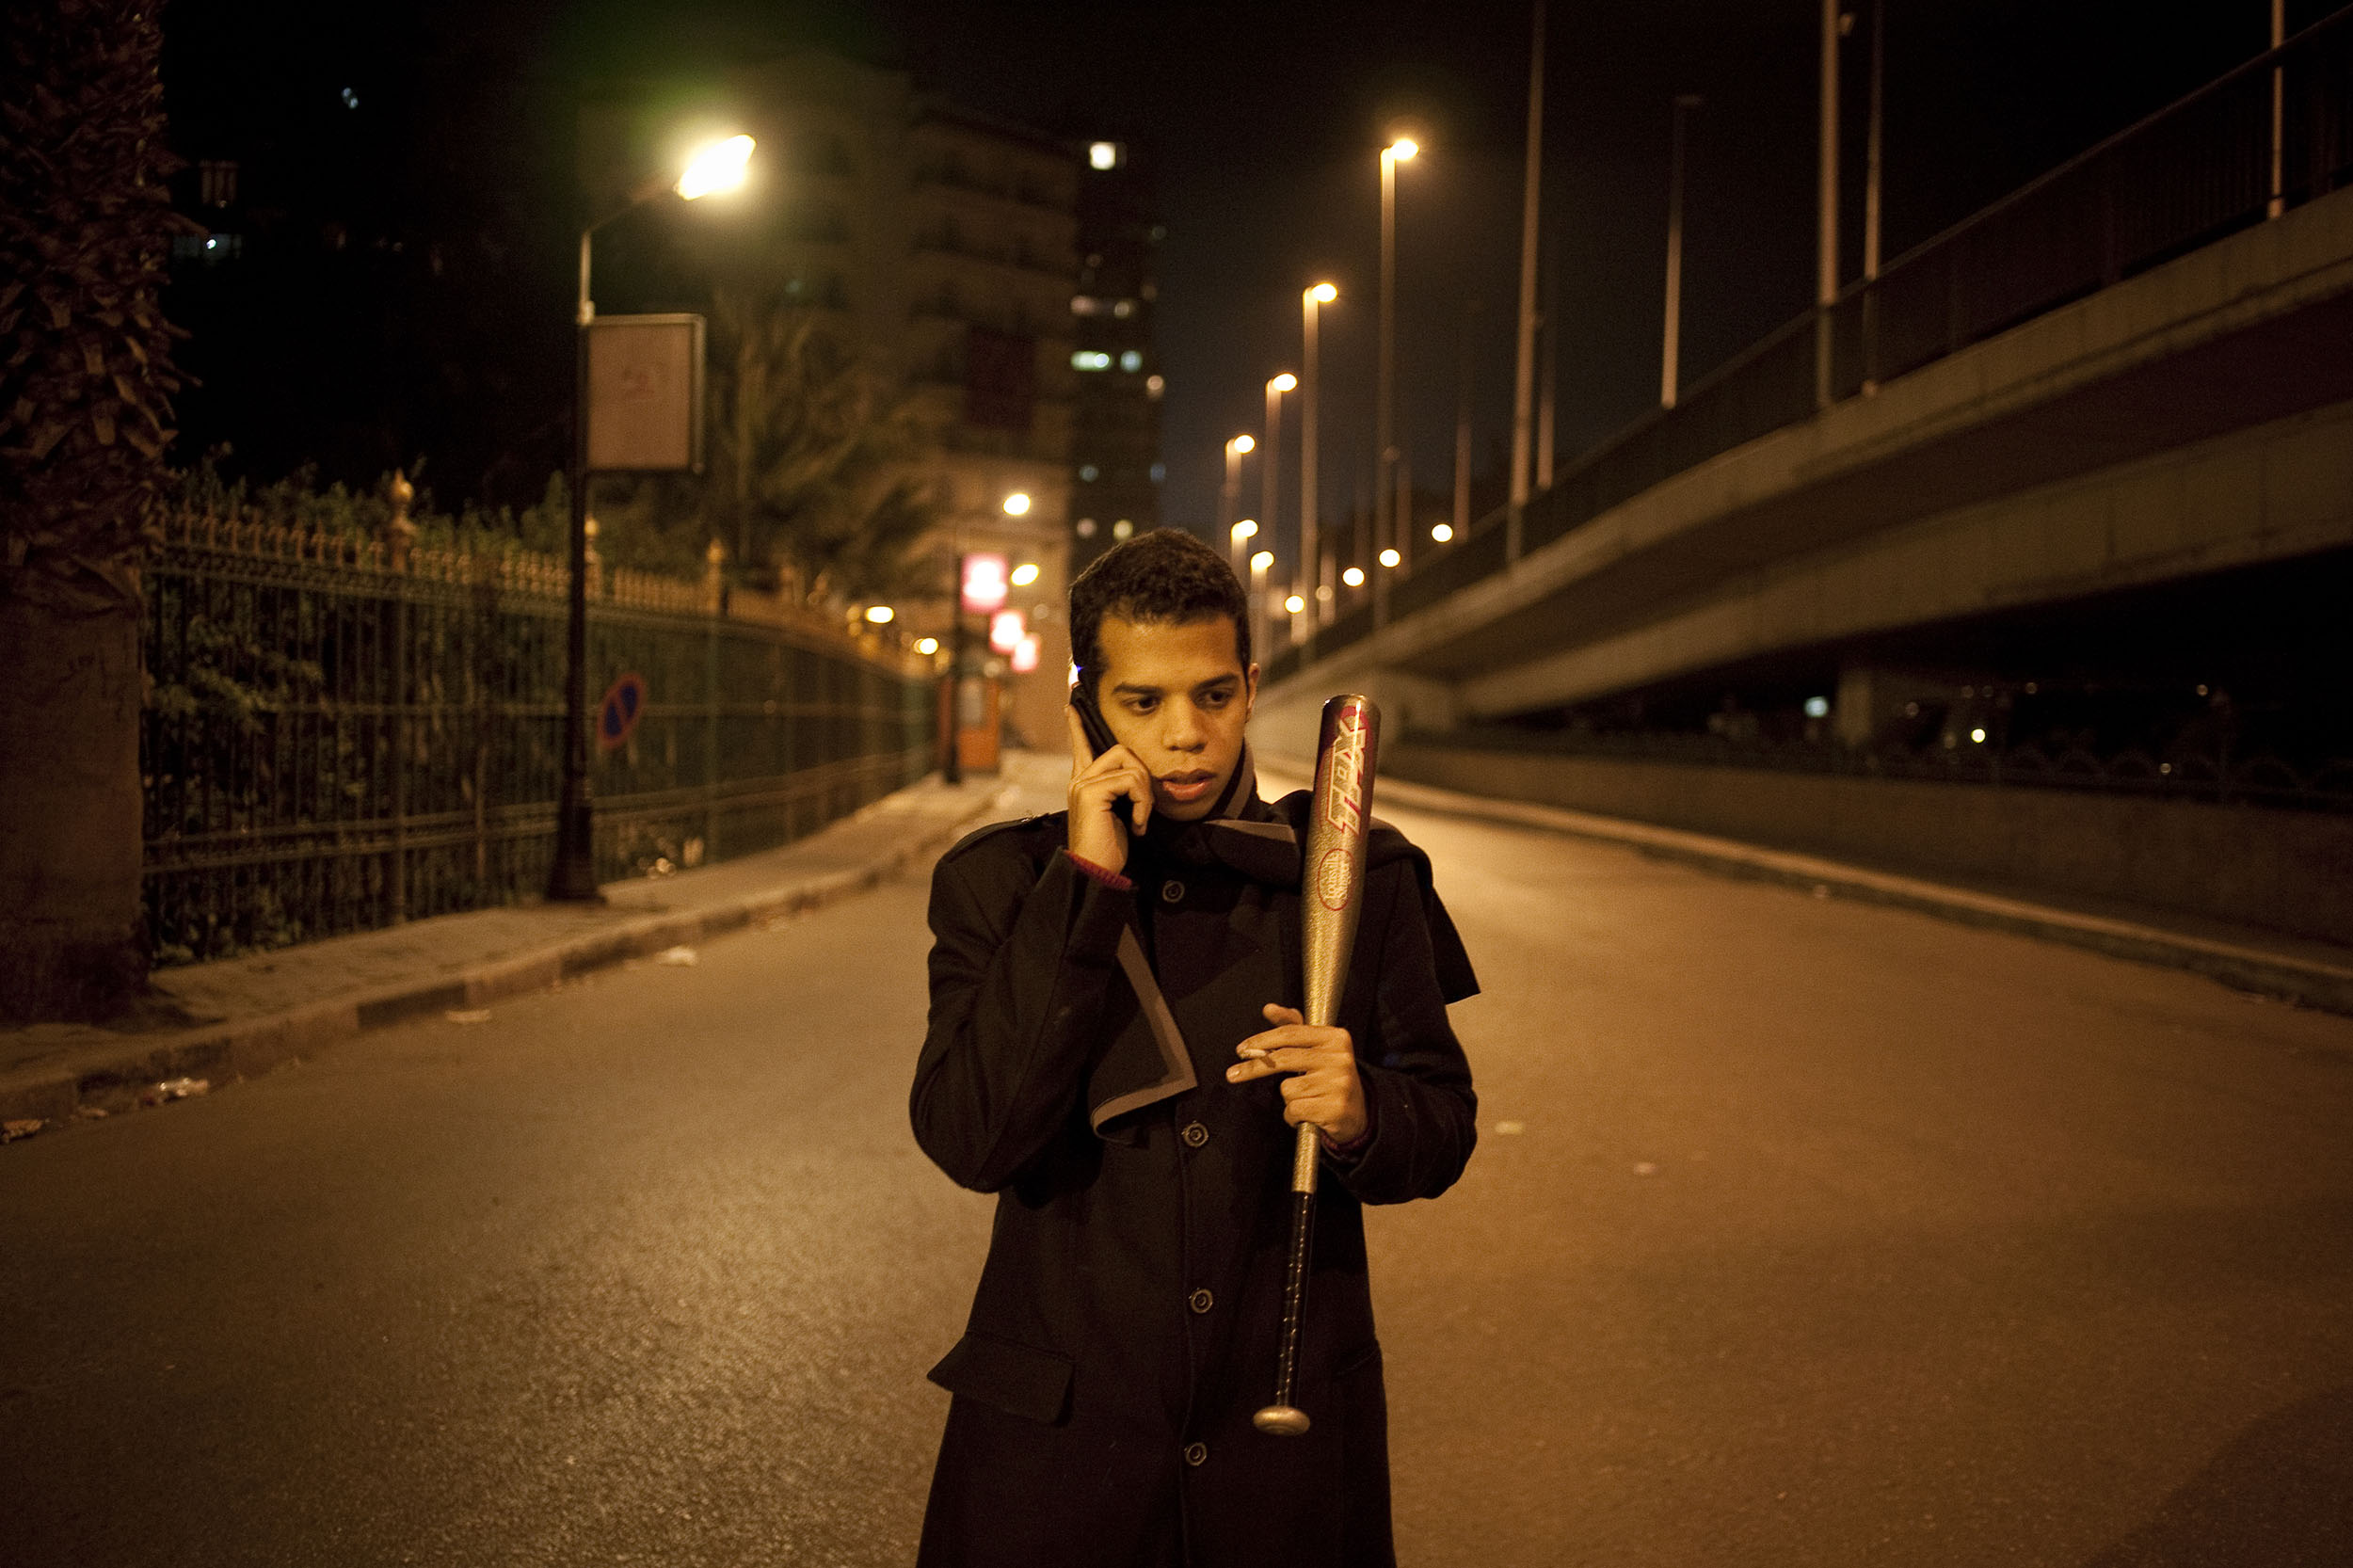  A young man guards the middle class neighbourhood of Zamalek from looters and gangs as he talks on a mobile phone holding a baseball bat.  